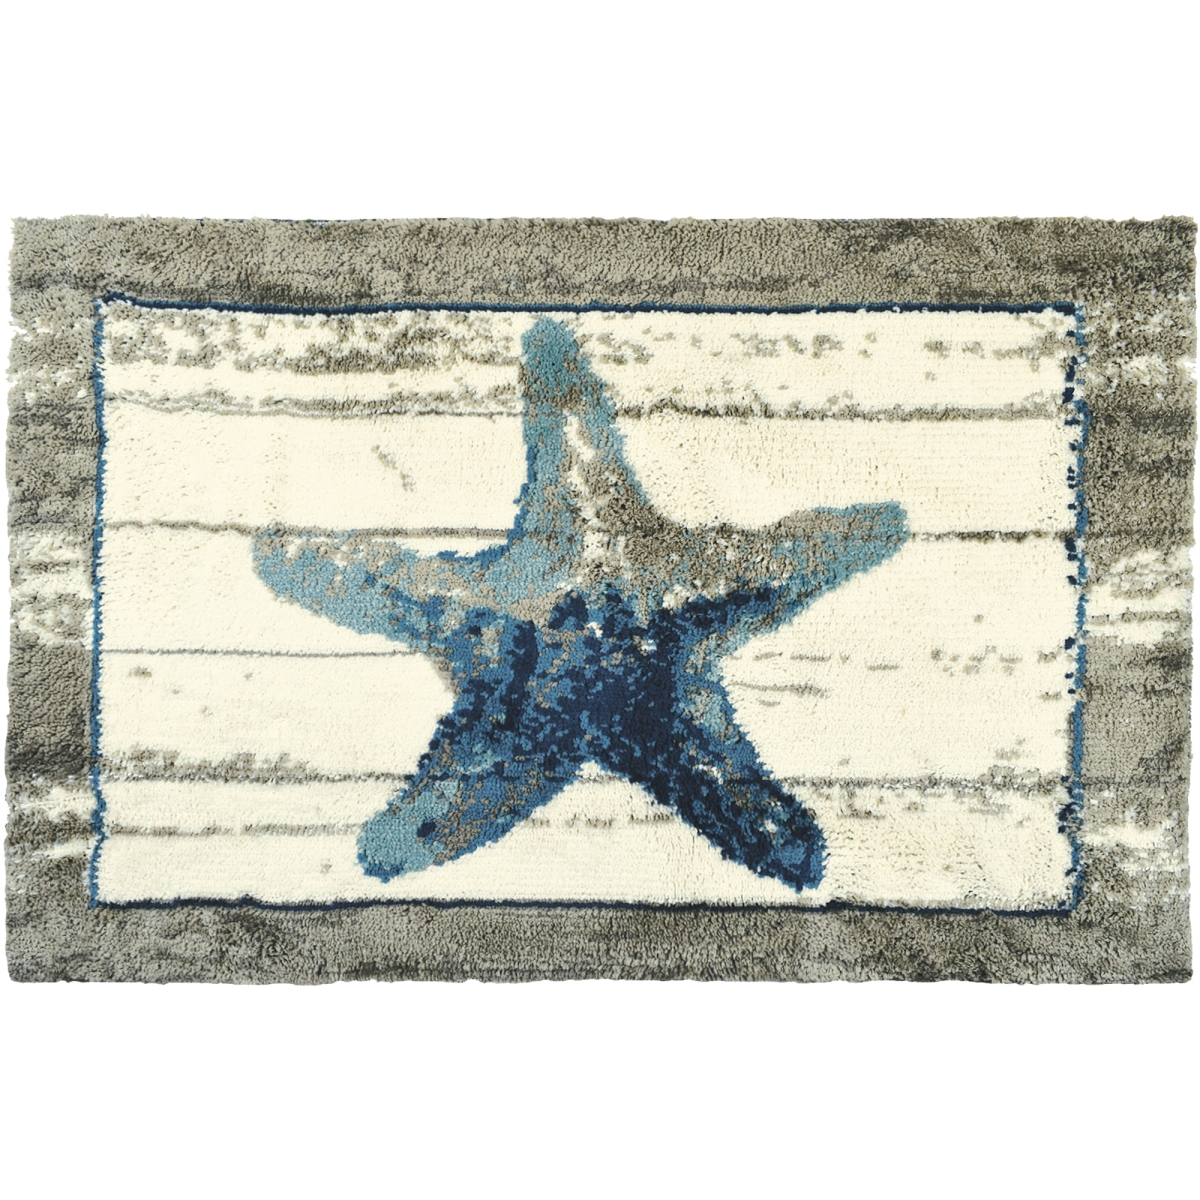 Mfa-ll001 34 X 22 X 0.5 In. Driftwood Starfish Accent Rug, Multi Color